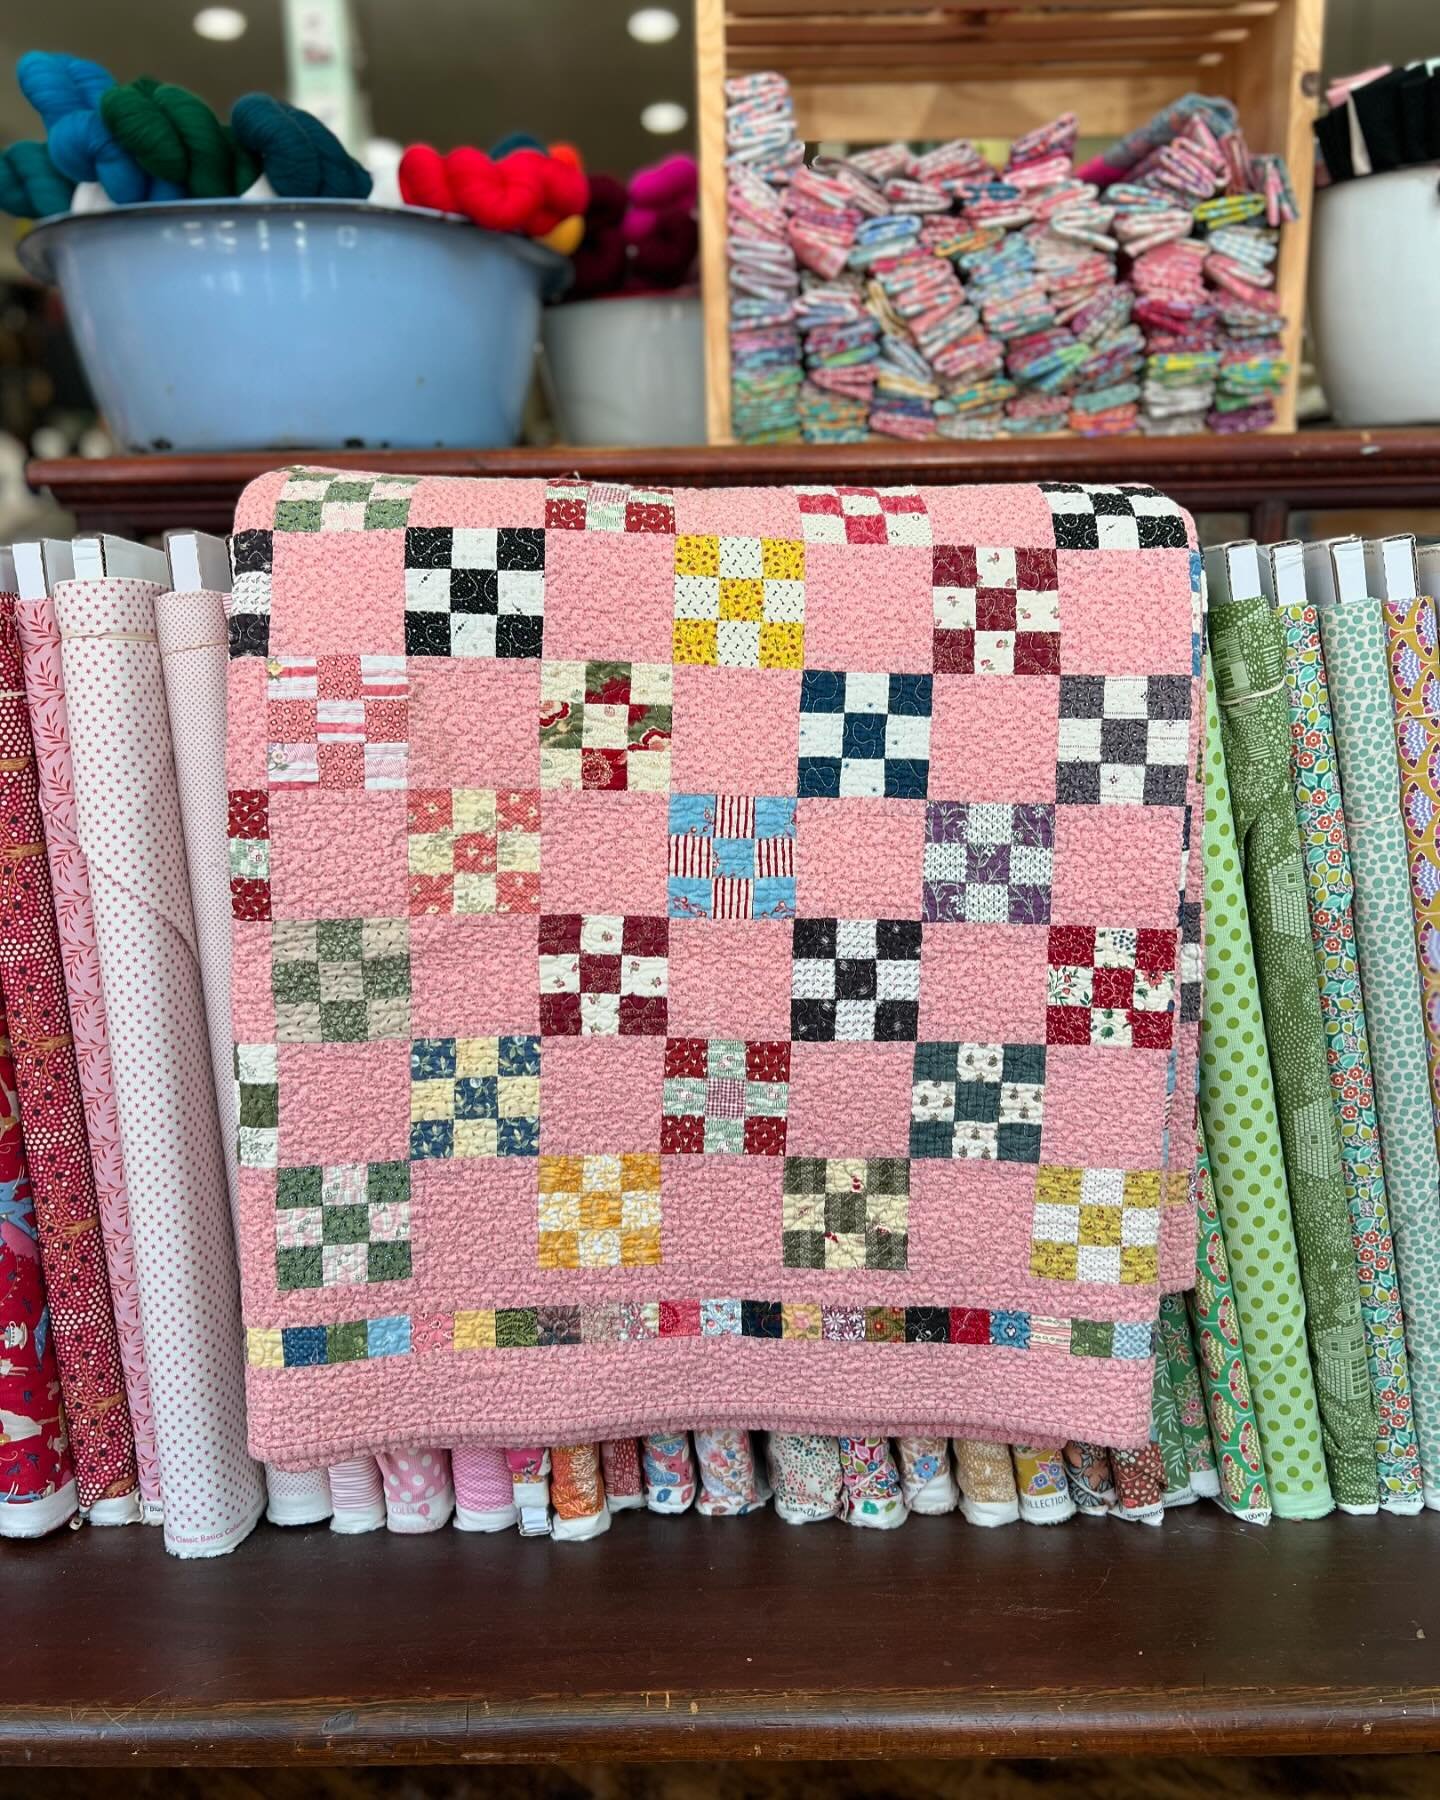 Ginger and Beth brought in their block swap quilts. Now we all want to do a swap!! 🥰🥰🥰

Questions: have you ever participated in a swap? What block did you make? Was it scrappy? Or themes?  Thanks for your insight! 

#quiltblockswap 

Our shop hou